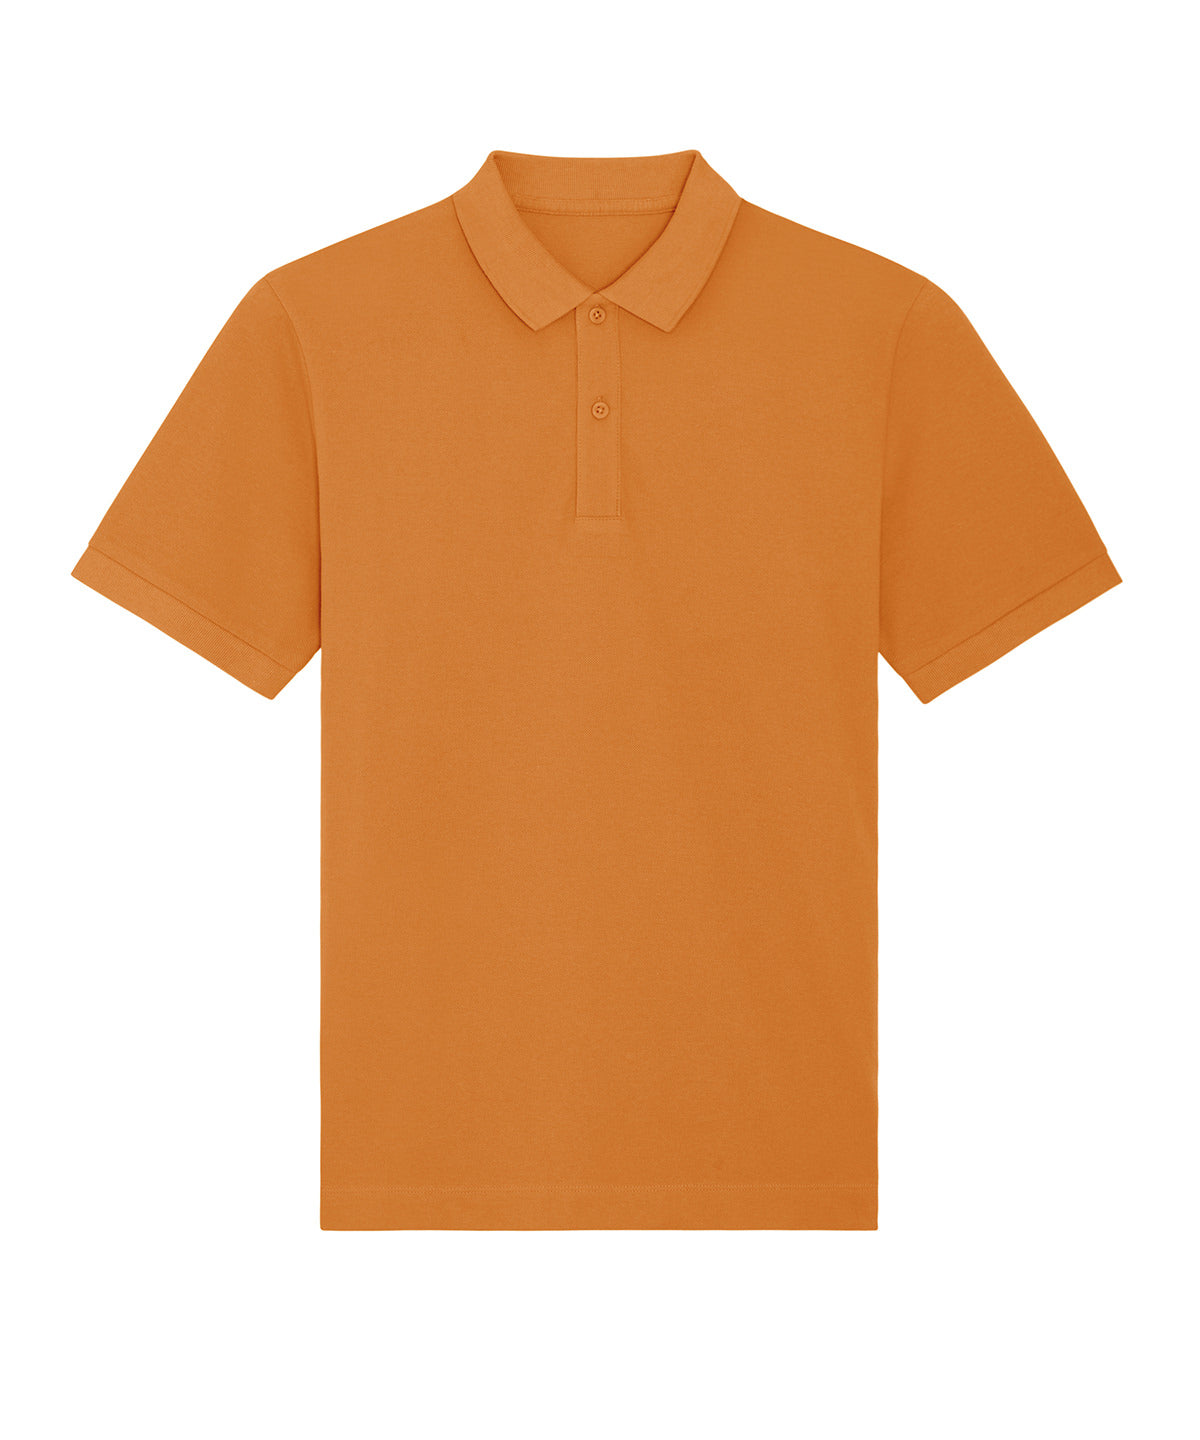 Stanley/Stella Prepster Unisex Short Sleeve Polo Day Fall